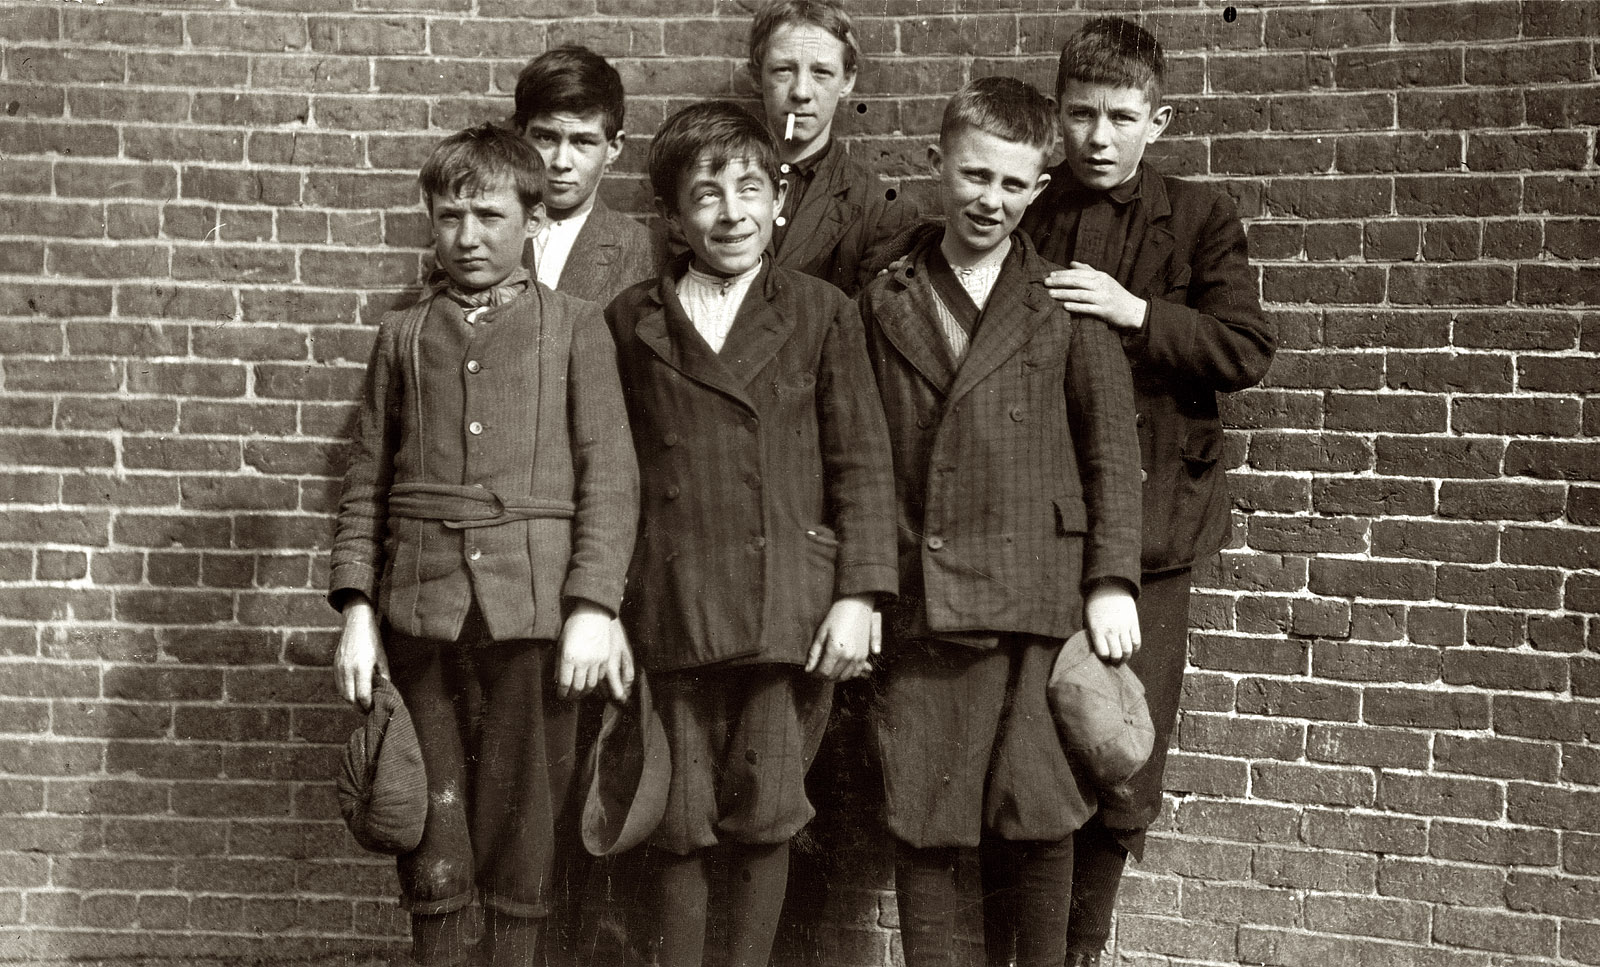 October 1911. Vicinity of Lowell and South Framingham, Mass. Merrimac Mill boys. Front row: Smallest, Robert Magee, 270 Suffolk Street; John Neary, 211 Lakeview Avenue; Michael Keefe, 32 Marion Street. Back row: Edward Foster, 40 Fulton Street; John Risheck, 391 Adams Street; Cornelius Hurley, 68 Adams Street, No. 1 mill room. View full size. Photograph by Lewis Wickes Hine.